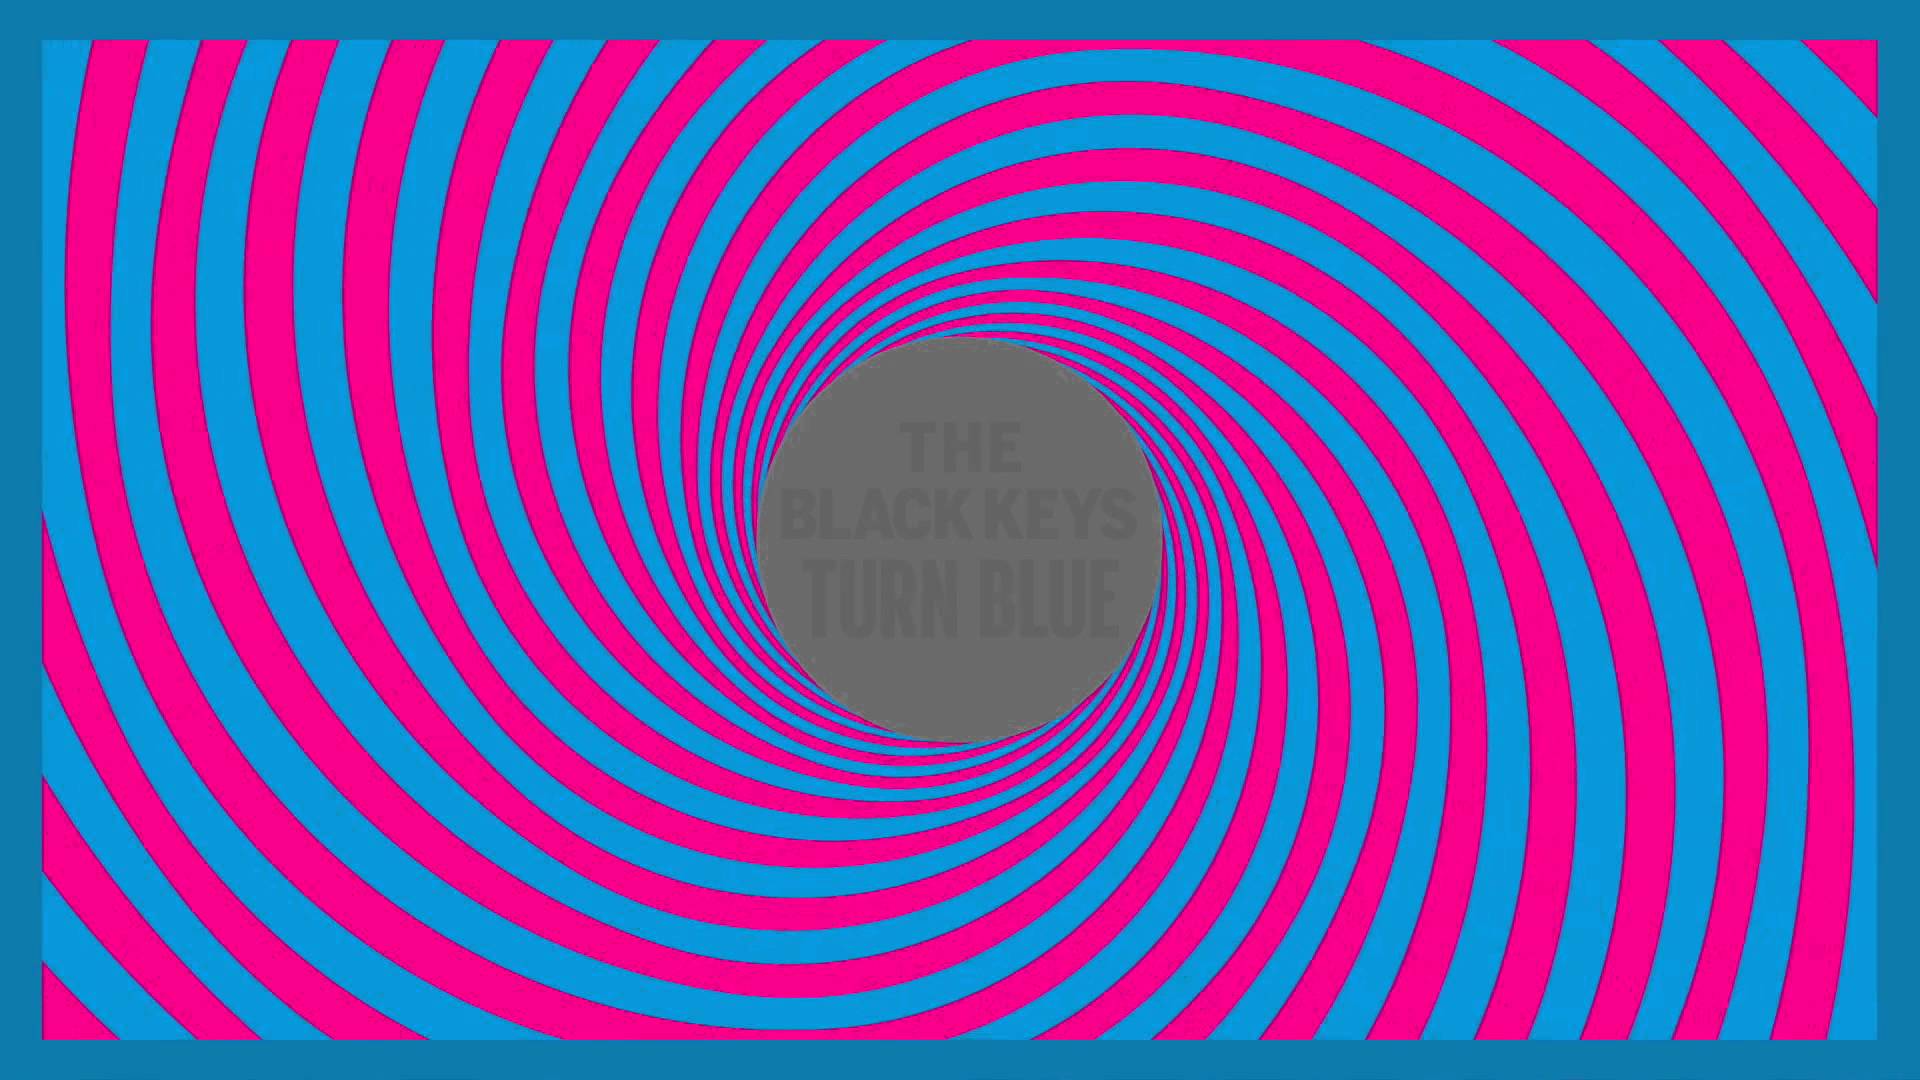 The Black Keys Are Turning Heads with New Single Turn Blue